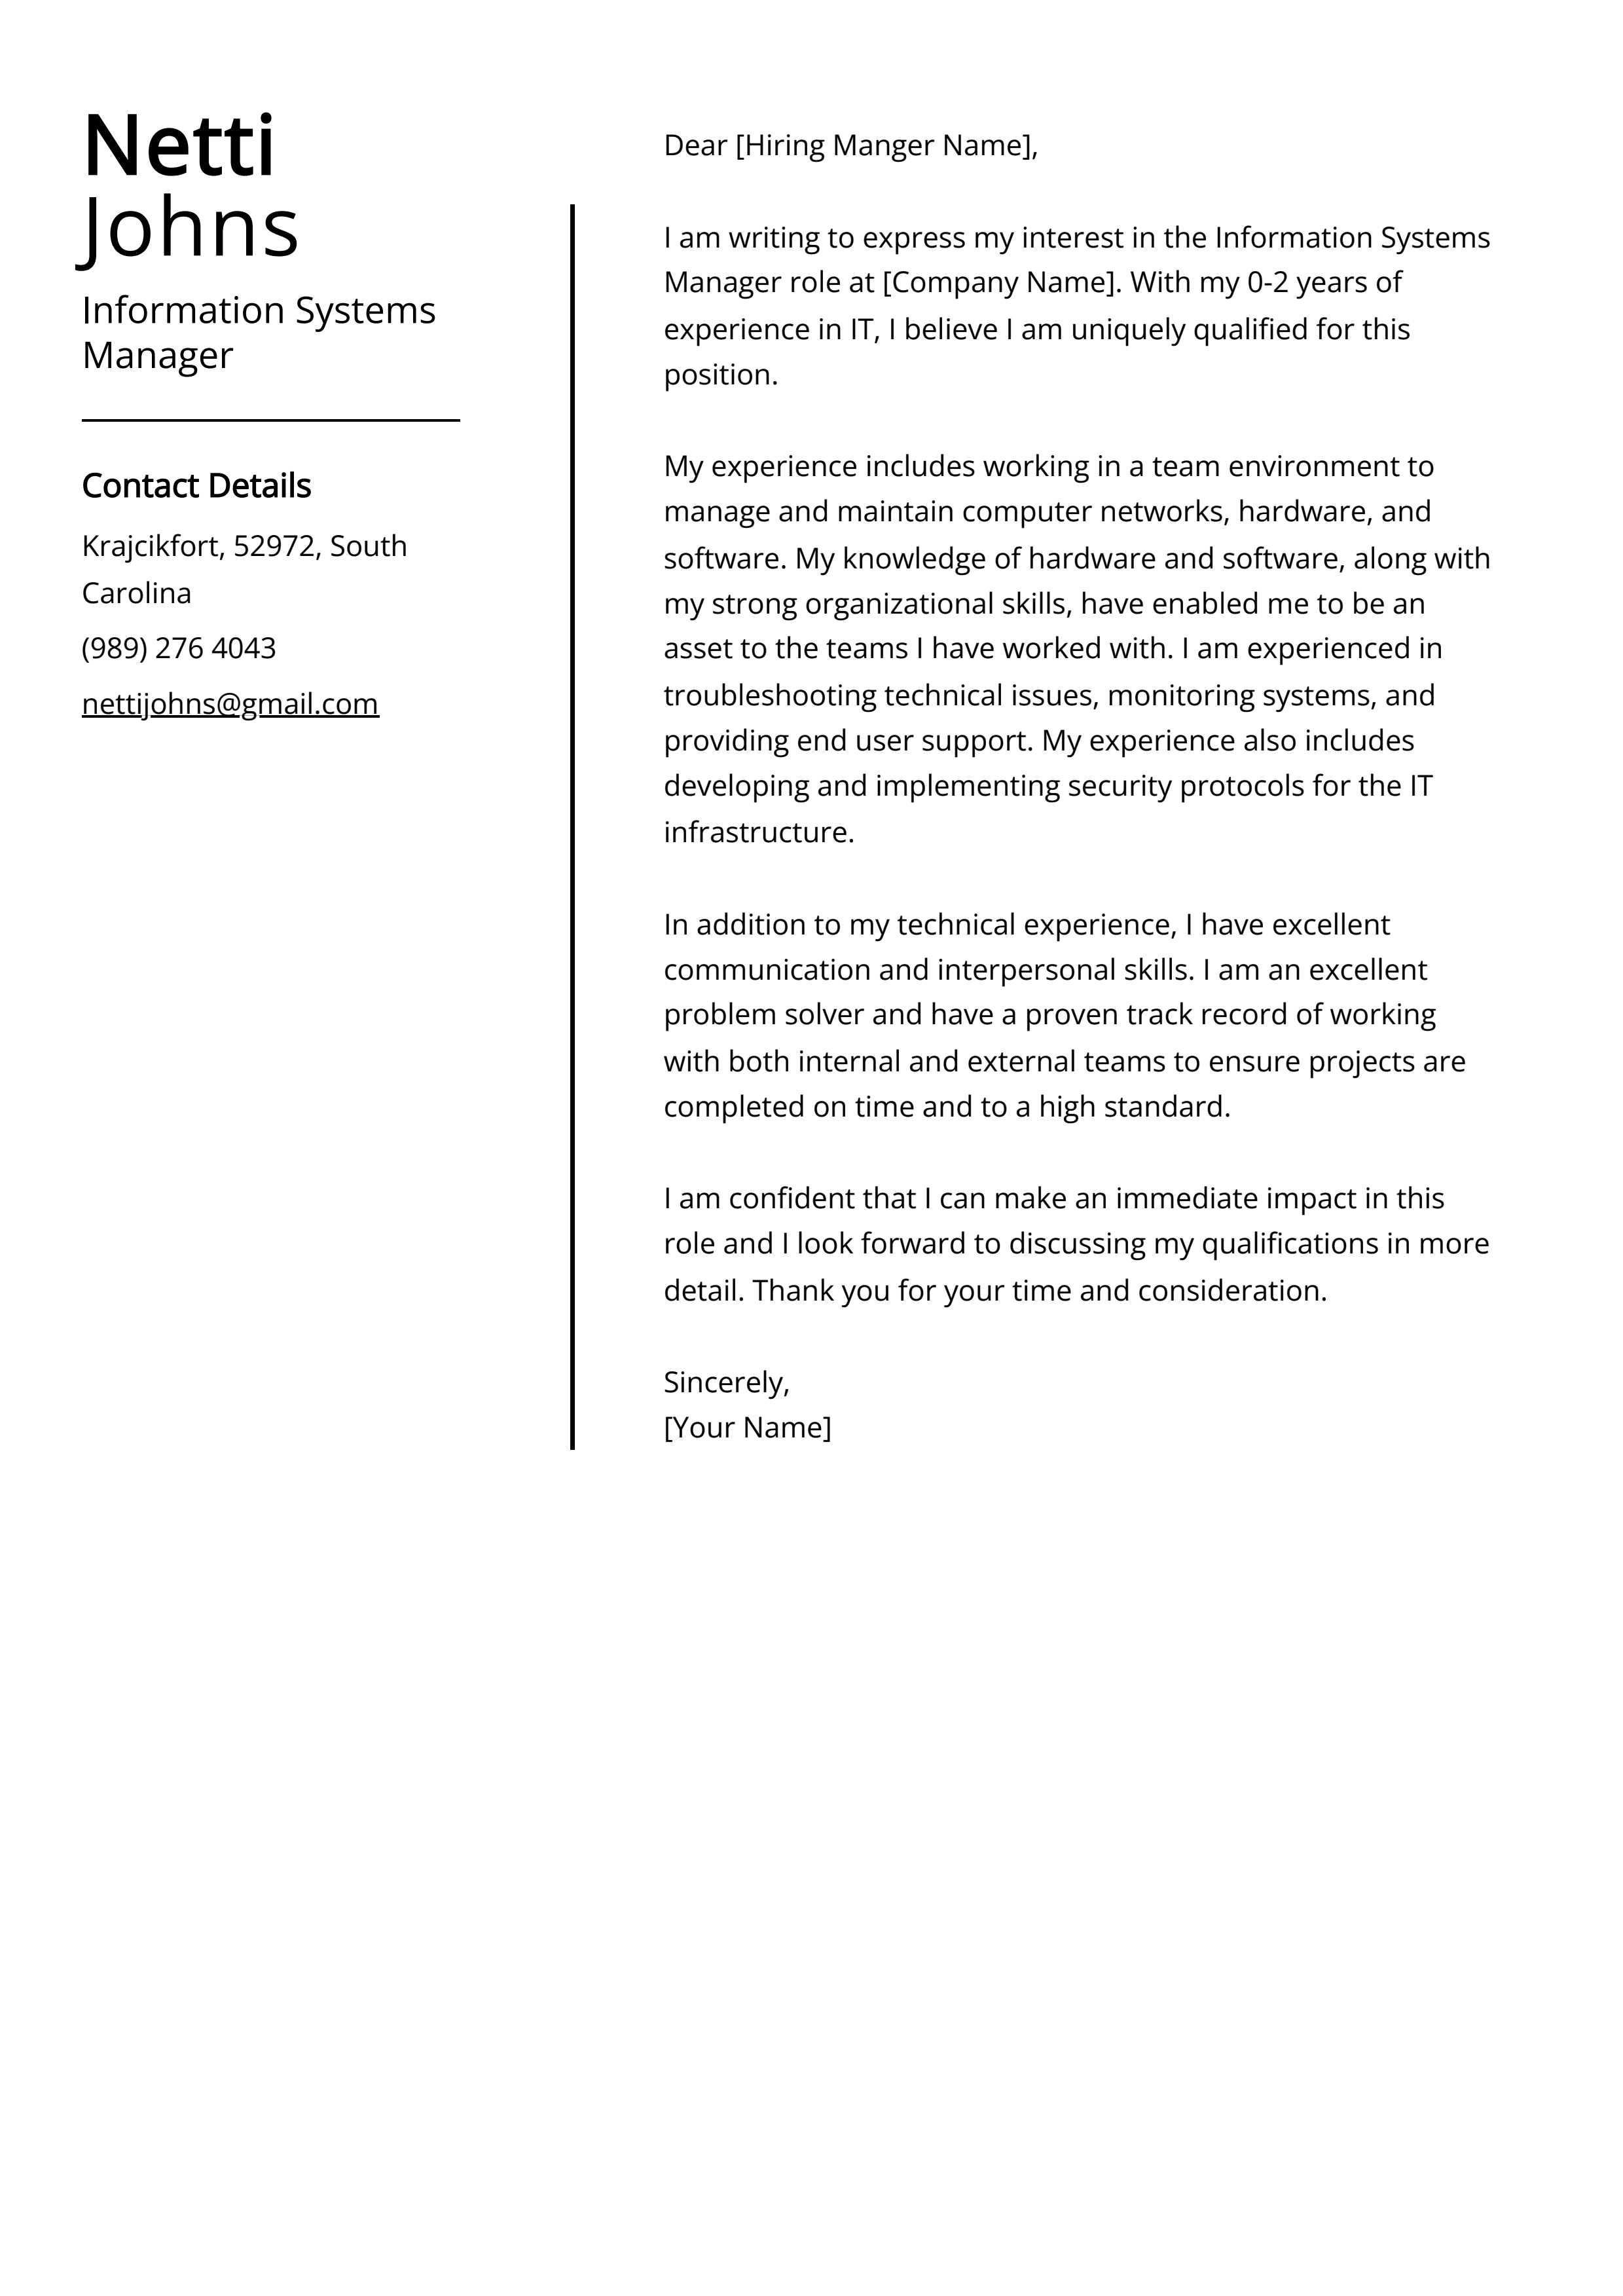 Information Systems Manager Cover Letter Example